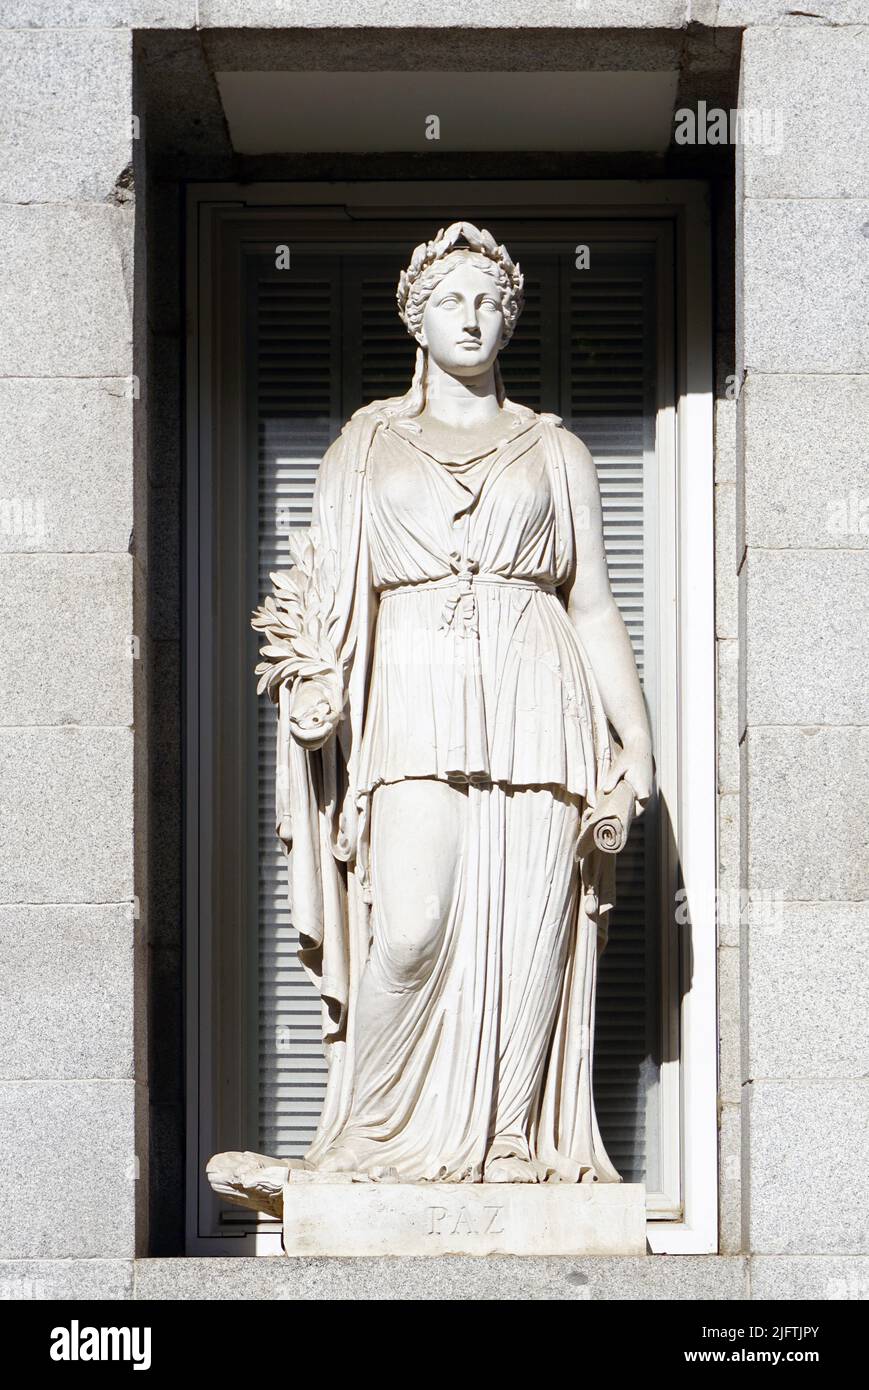 Paz by Valeriano Salvatierra (1789 - 1836) Spanish sculptor.Court sculptor to Ferdinand VII of Spain.This sculpture is one of twelve allegorical sculptures he made for the facade at the Museo del Prado in Madrid,Spain. Stock Photo